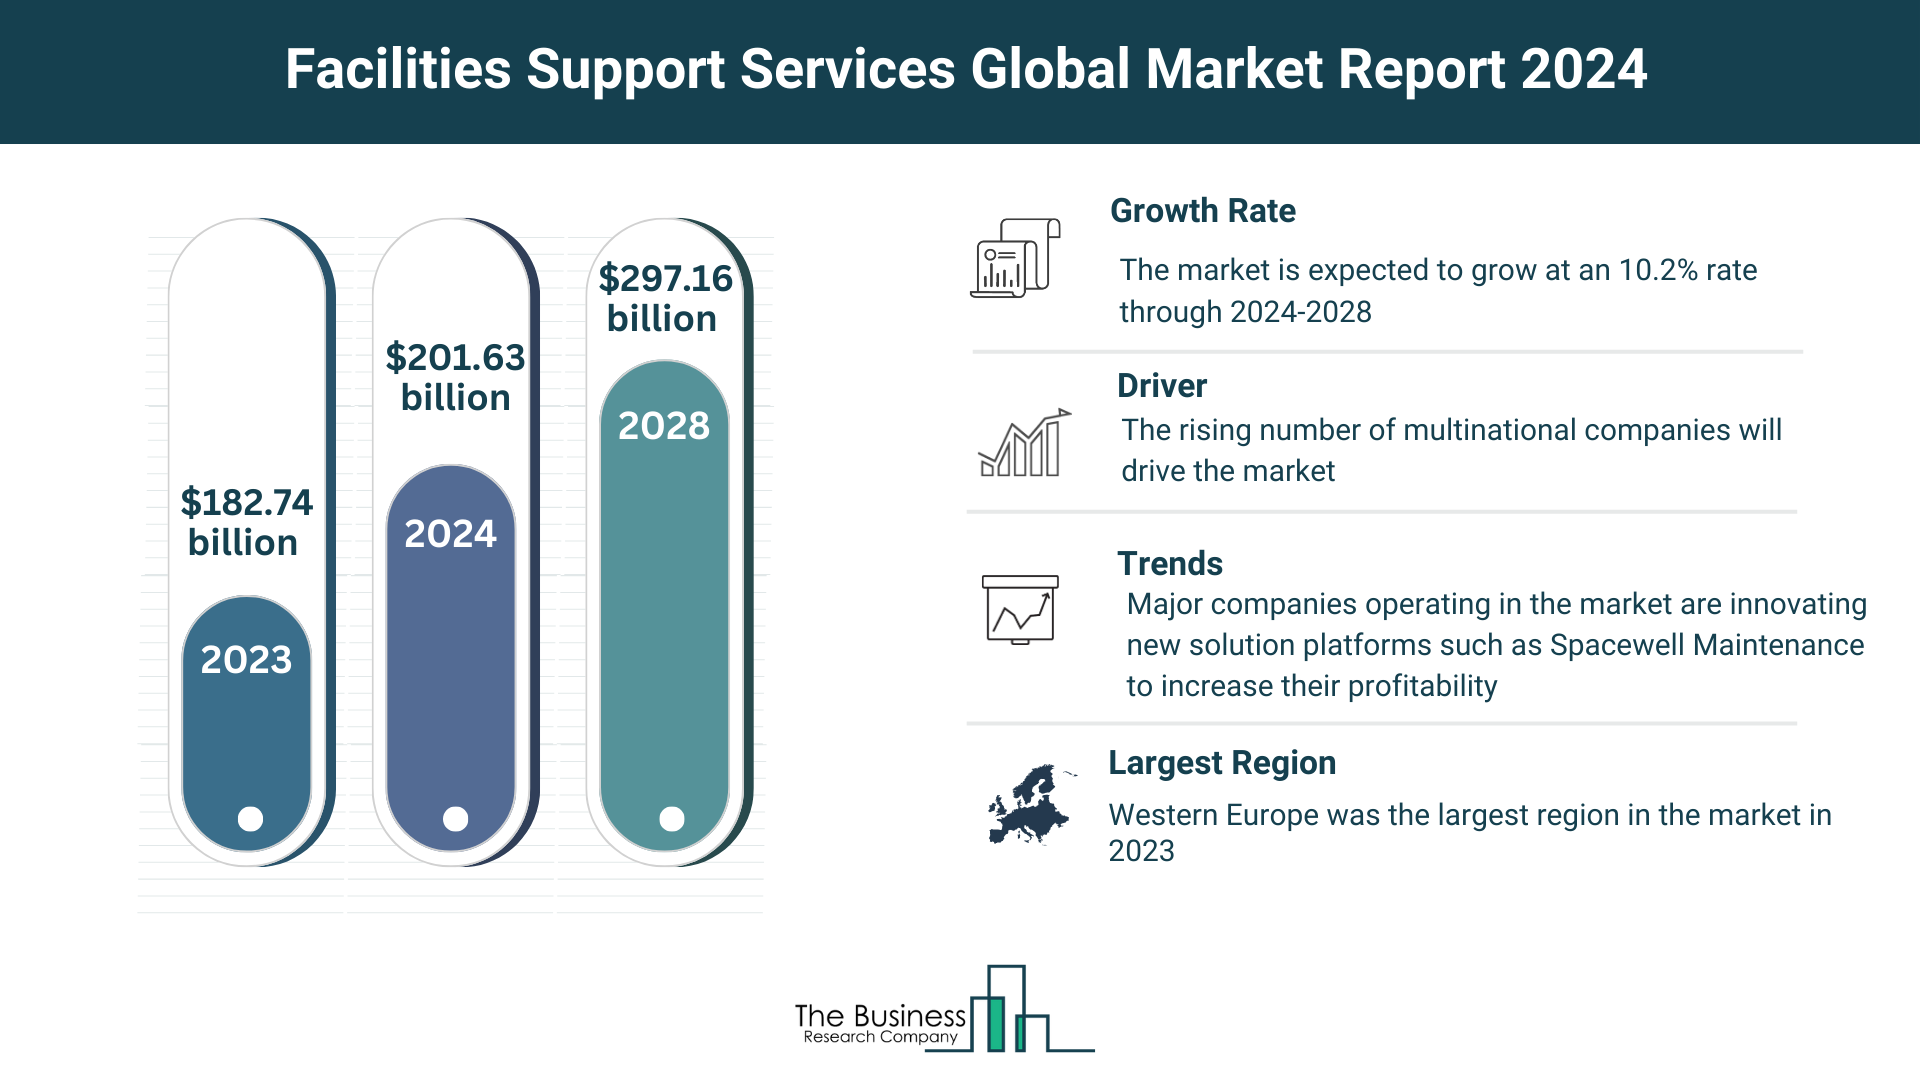 Global Facilities Support Services Market Analysis: Size, Drivers, Trends, Opportunities And Strategies